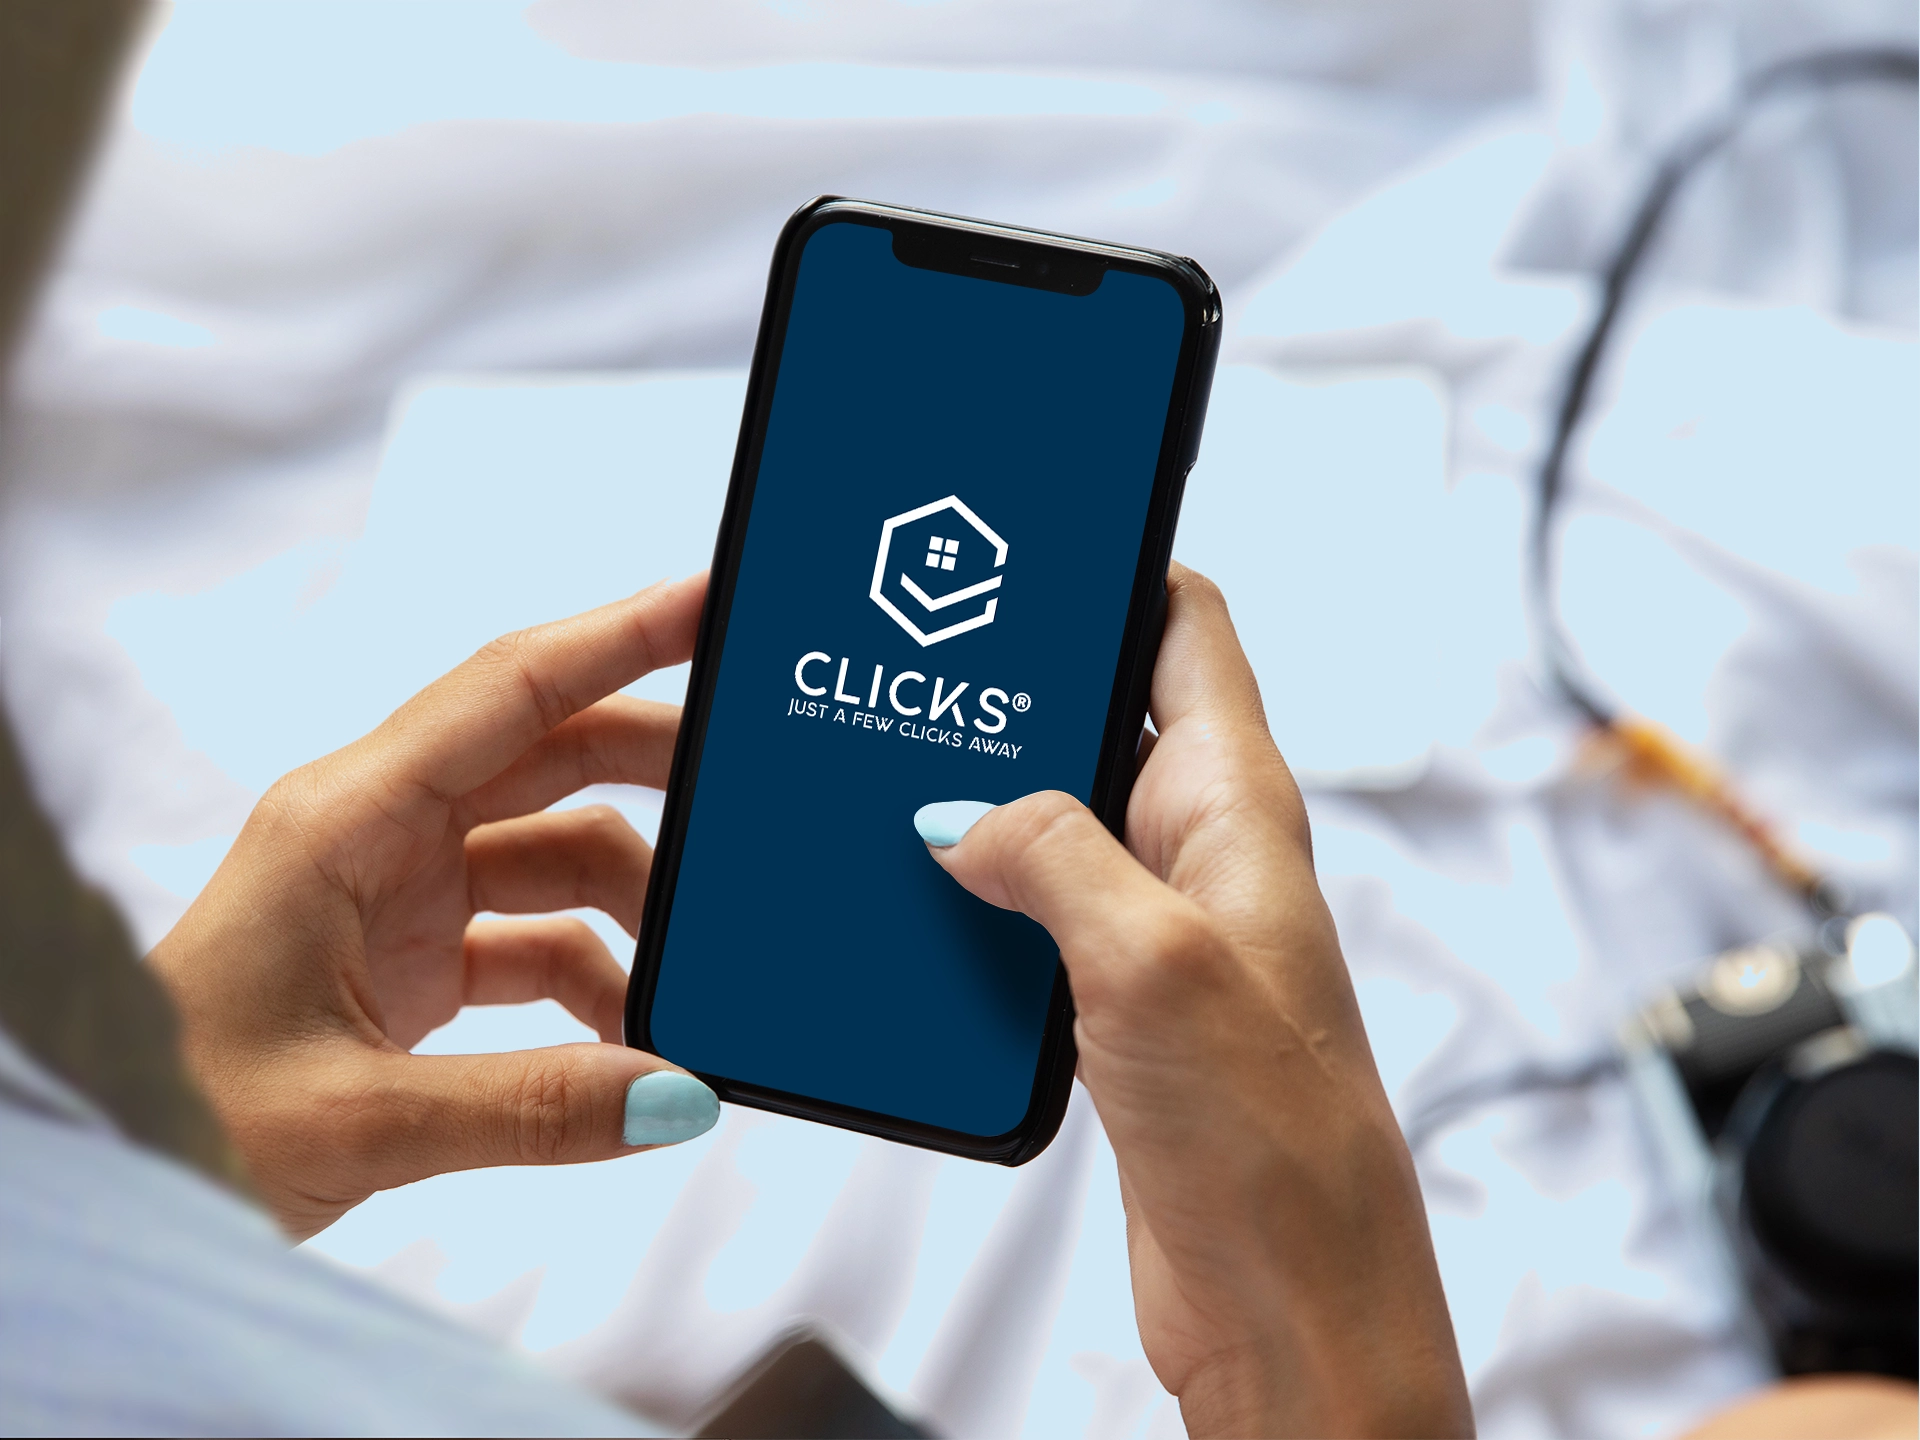 What is Clicks®?